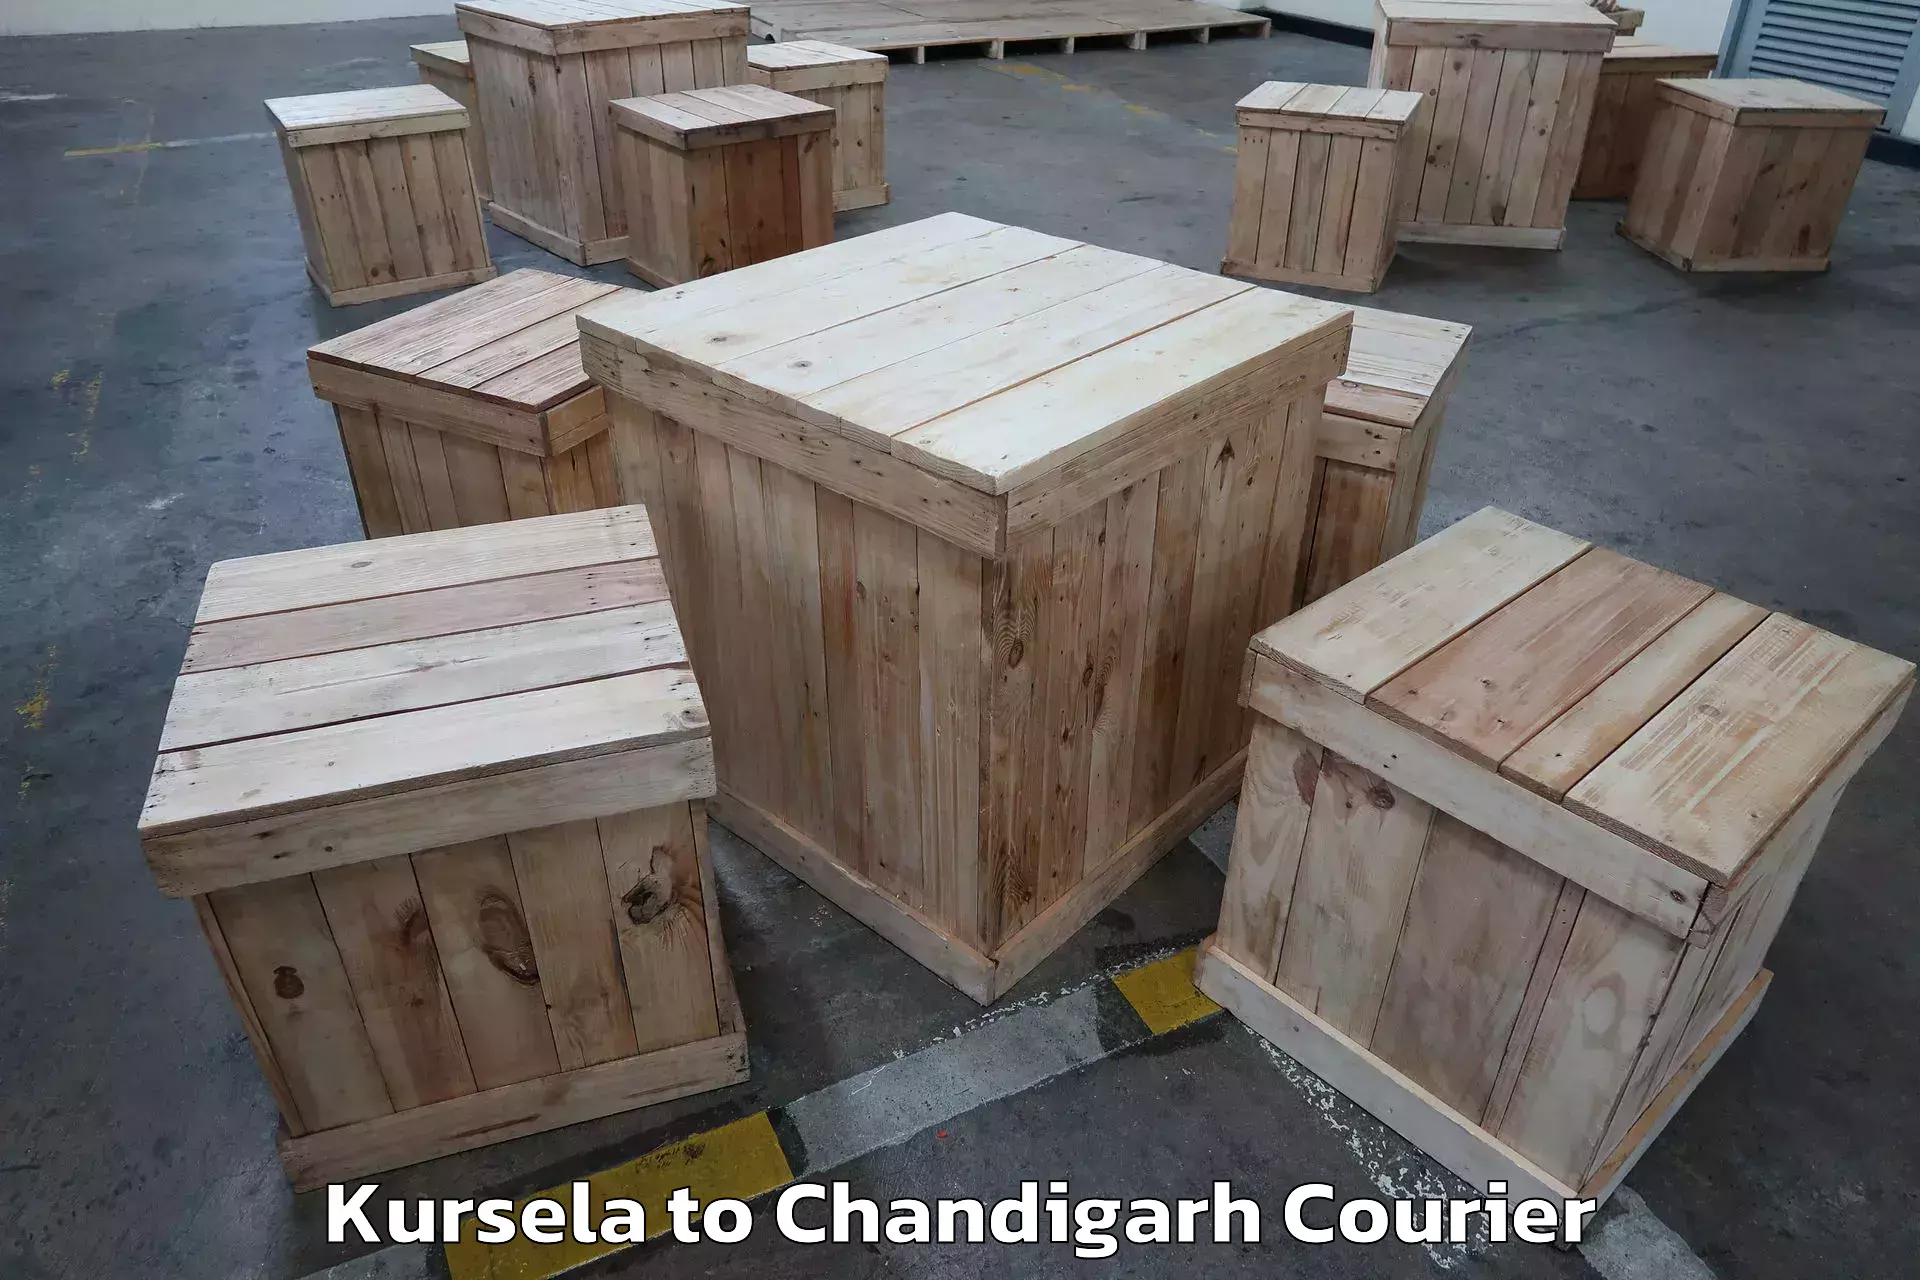 Moving and packing experts Kursela to Chandigarh